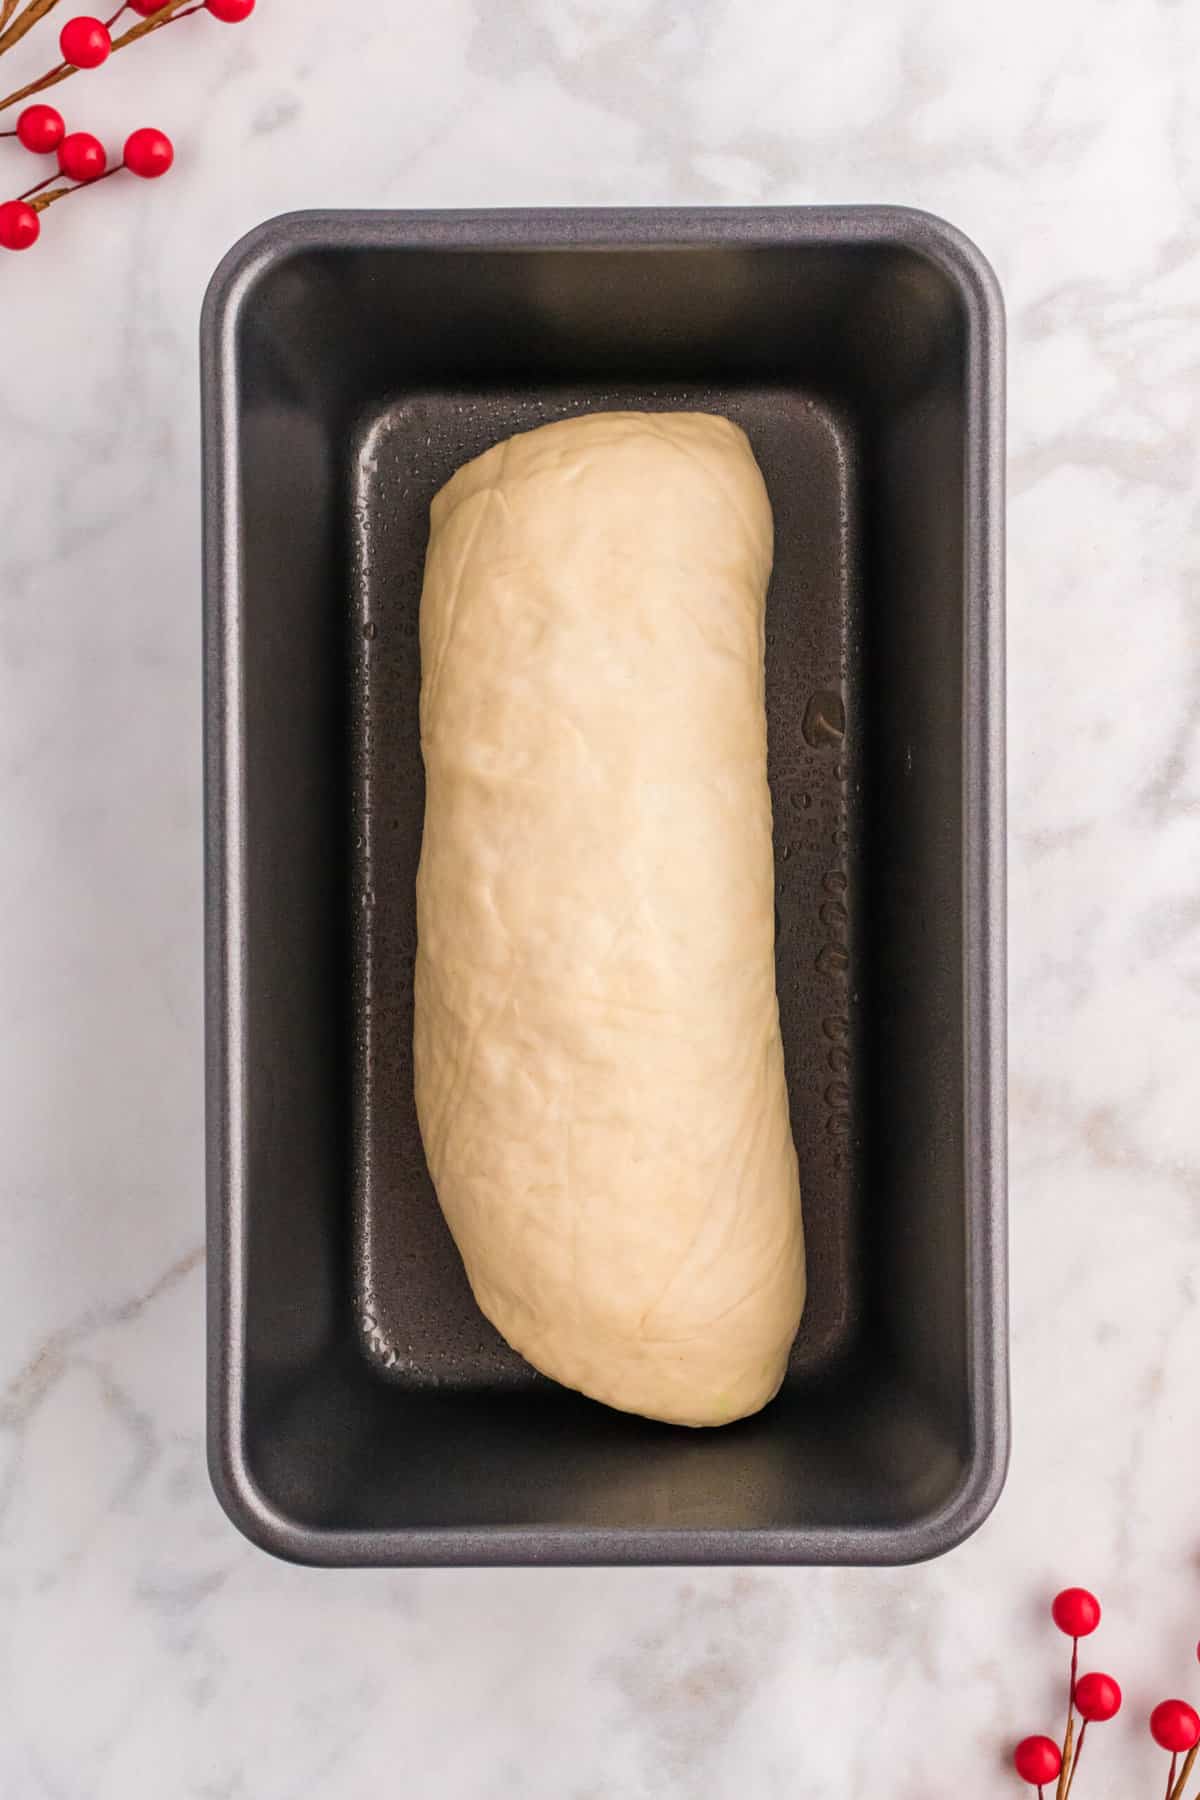 the prepared rolled dough in a loaf in the prepared pan